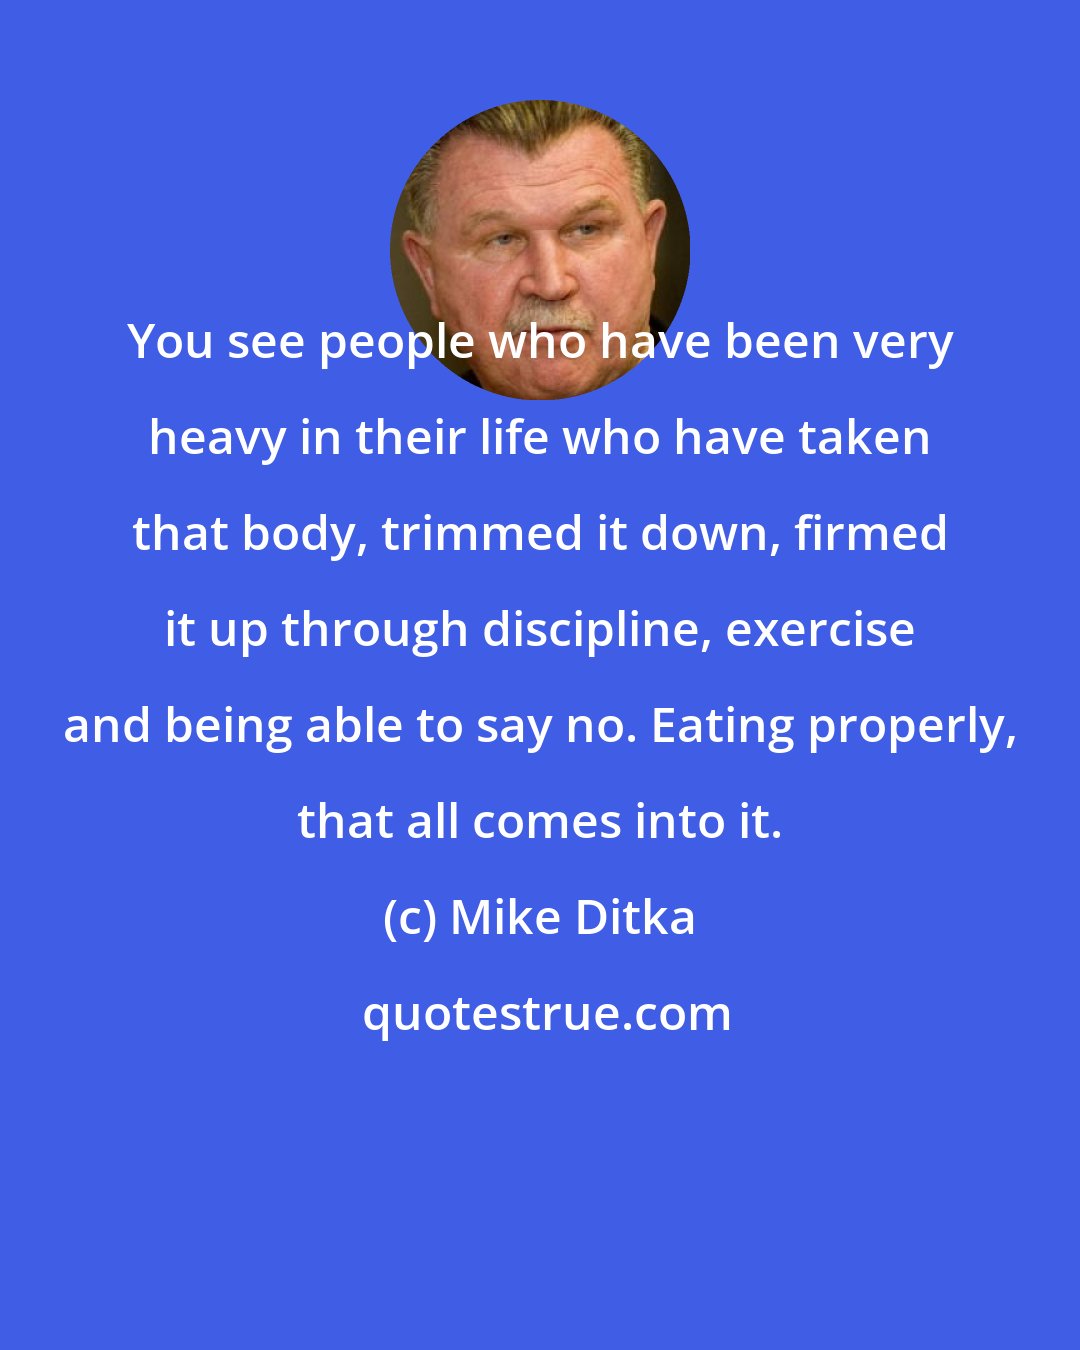 Mike Ditka: You see people who have been very heavy in their life who have taken that body, trimmed it down, firmed it up through discipline, exercise and being able to say no. Eating properly, that all comes into it.